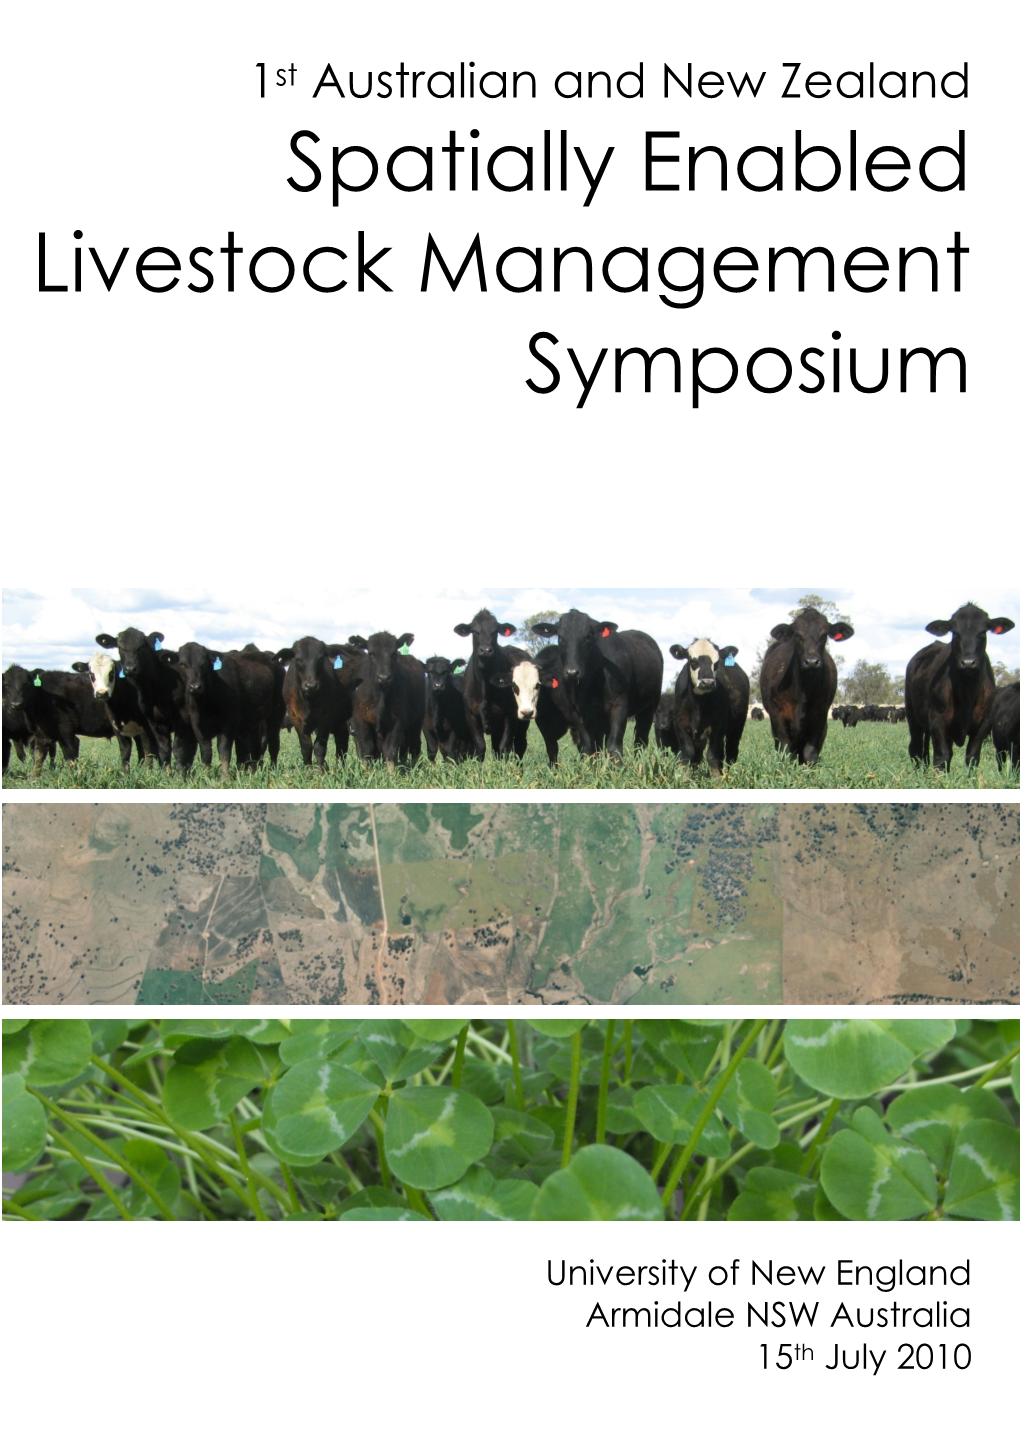 Spatially Enabled Livestock Management Symposium